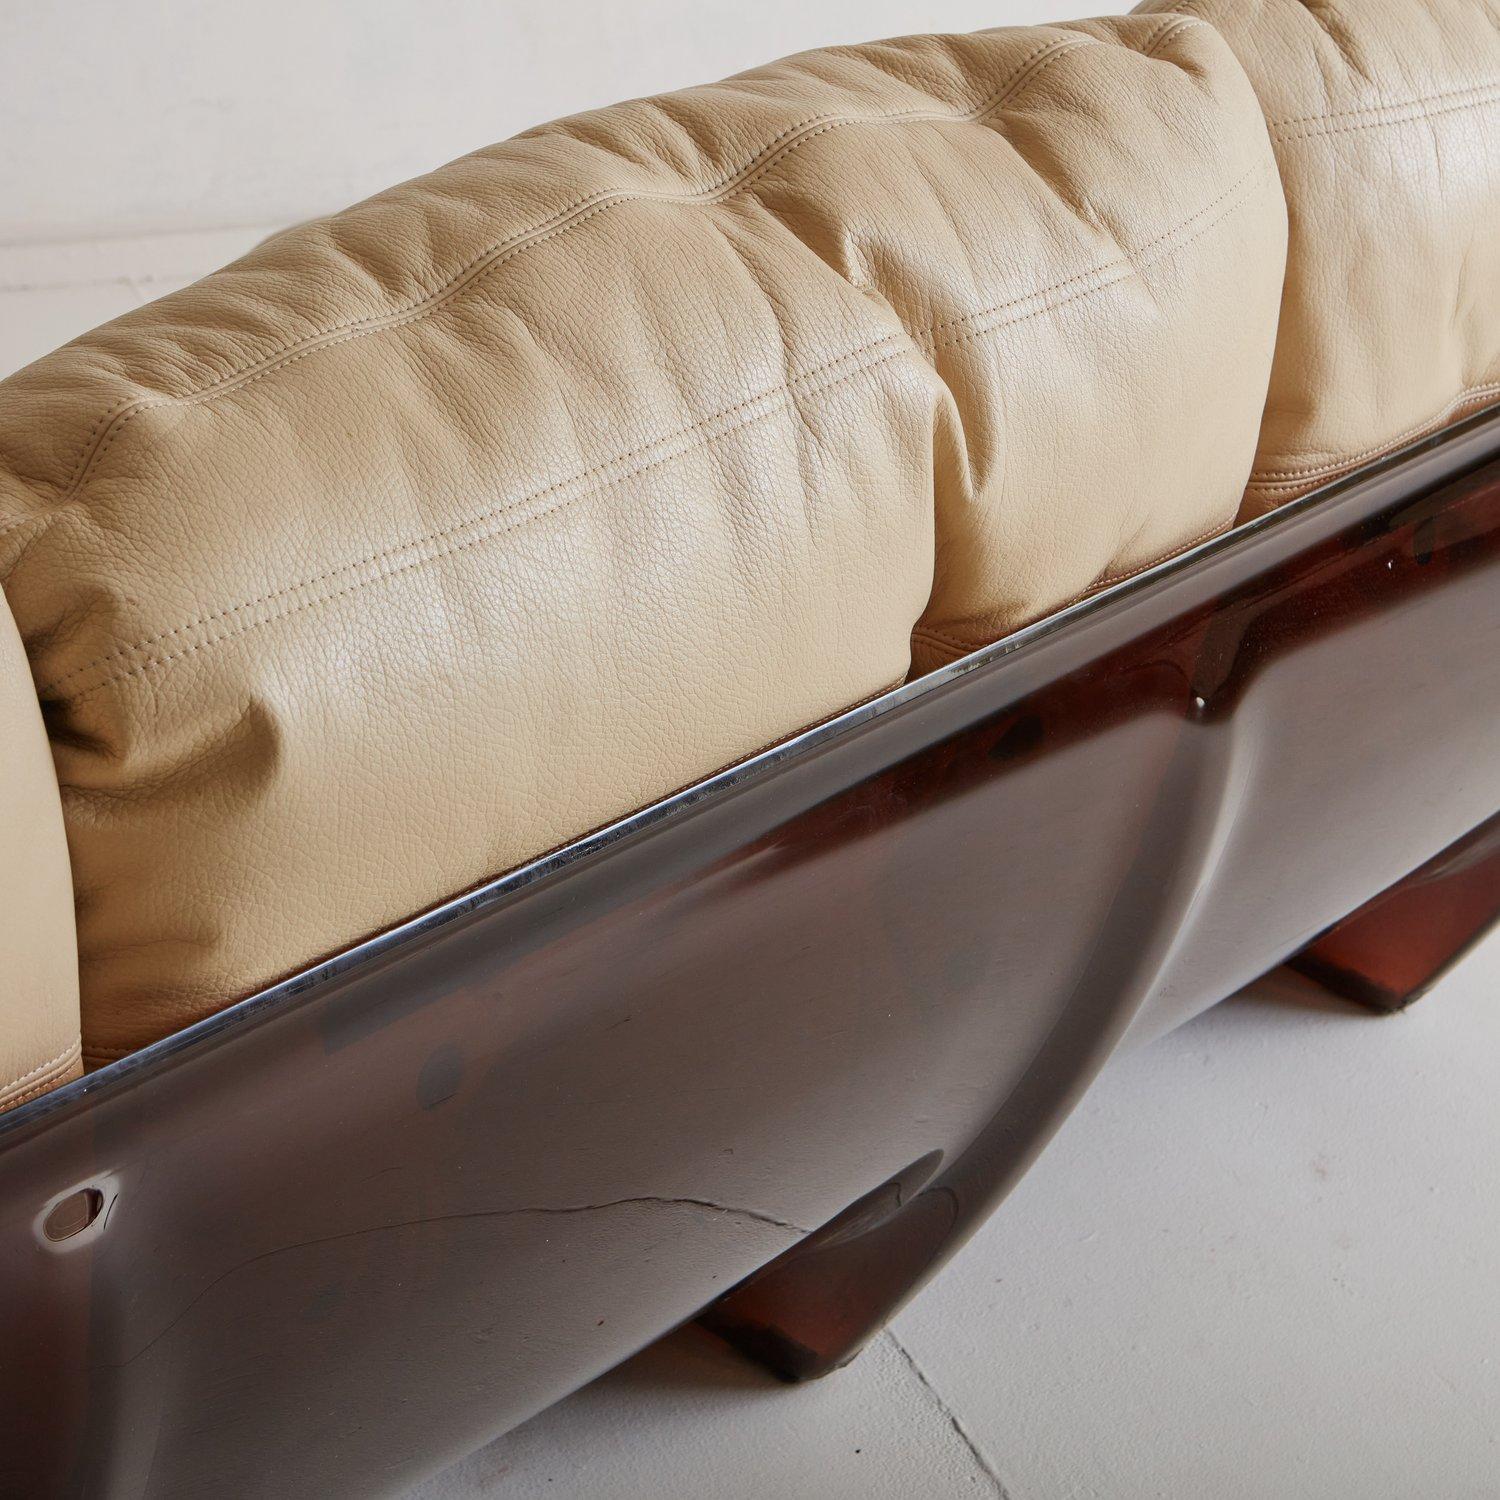 Leather Marsala Three-Seat Sofa by Michel Ducaroy for Lignet Roset, France 1970s For Sale 6